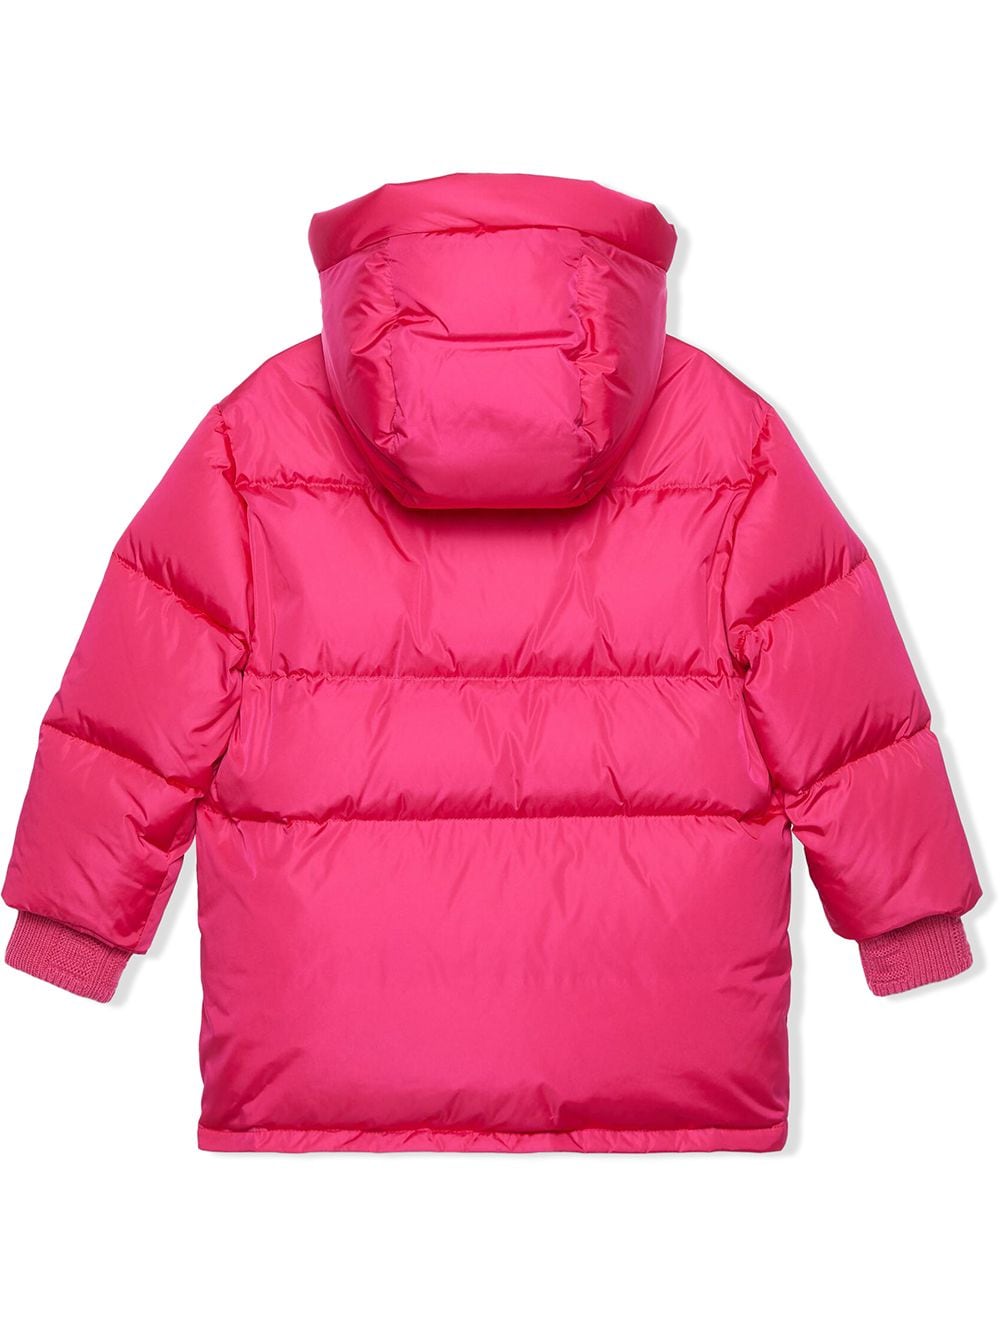 Gucci Kids Double G Padded Down Coat - Farfetch